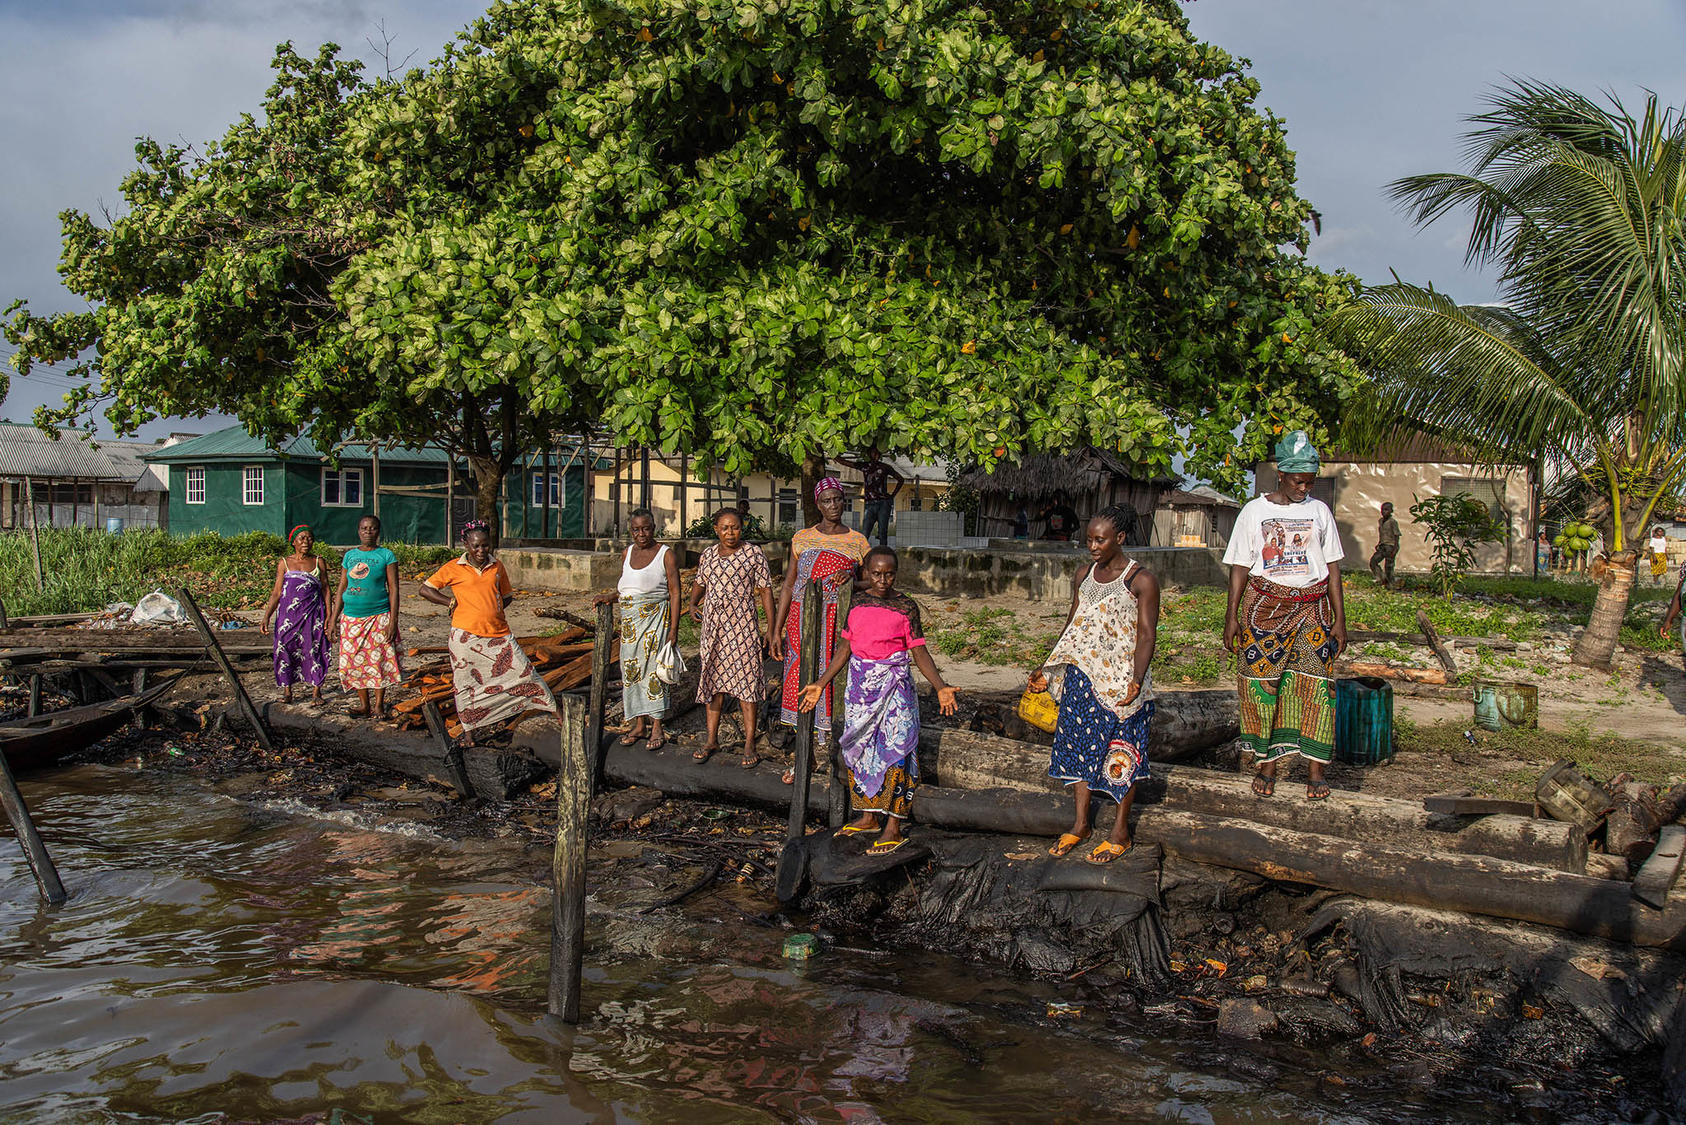 Women in the Niger River delta survey an oil spill in waters that they fish for food. Protests in the delta against the oil industry’s destruction of people’s livelihoods are just one of Nigeria’s many upheavals. (Yagazie Emezi/The New York Times)